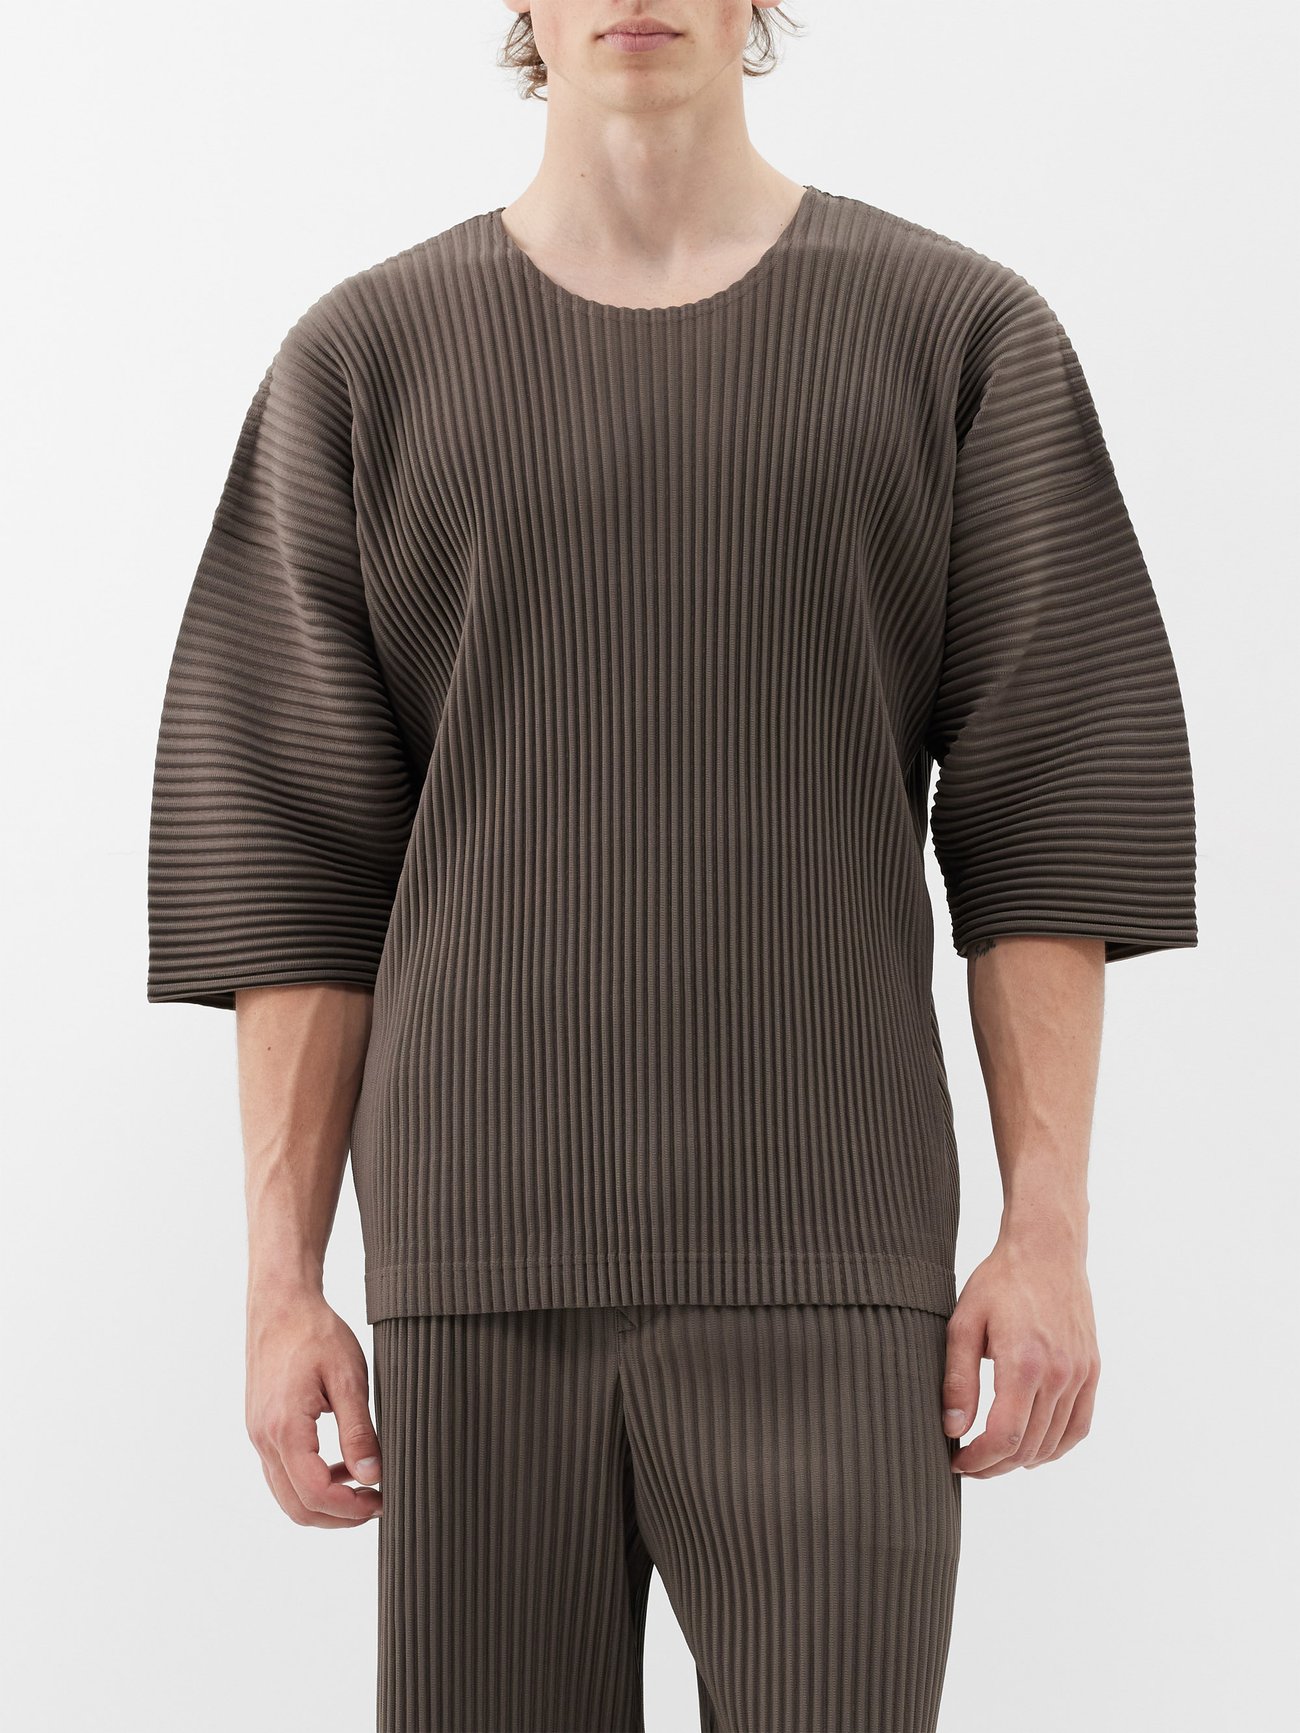 Brown Technical-pleated top | Homme Plissé Issey Miyake | MATCHES UK